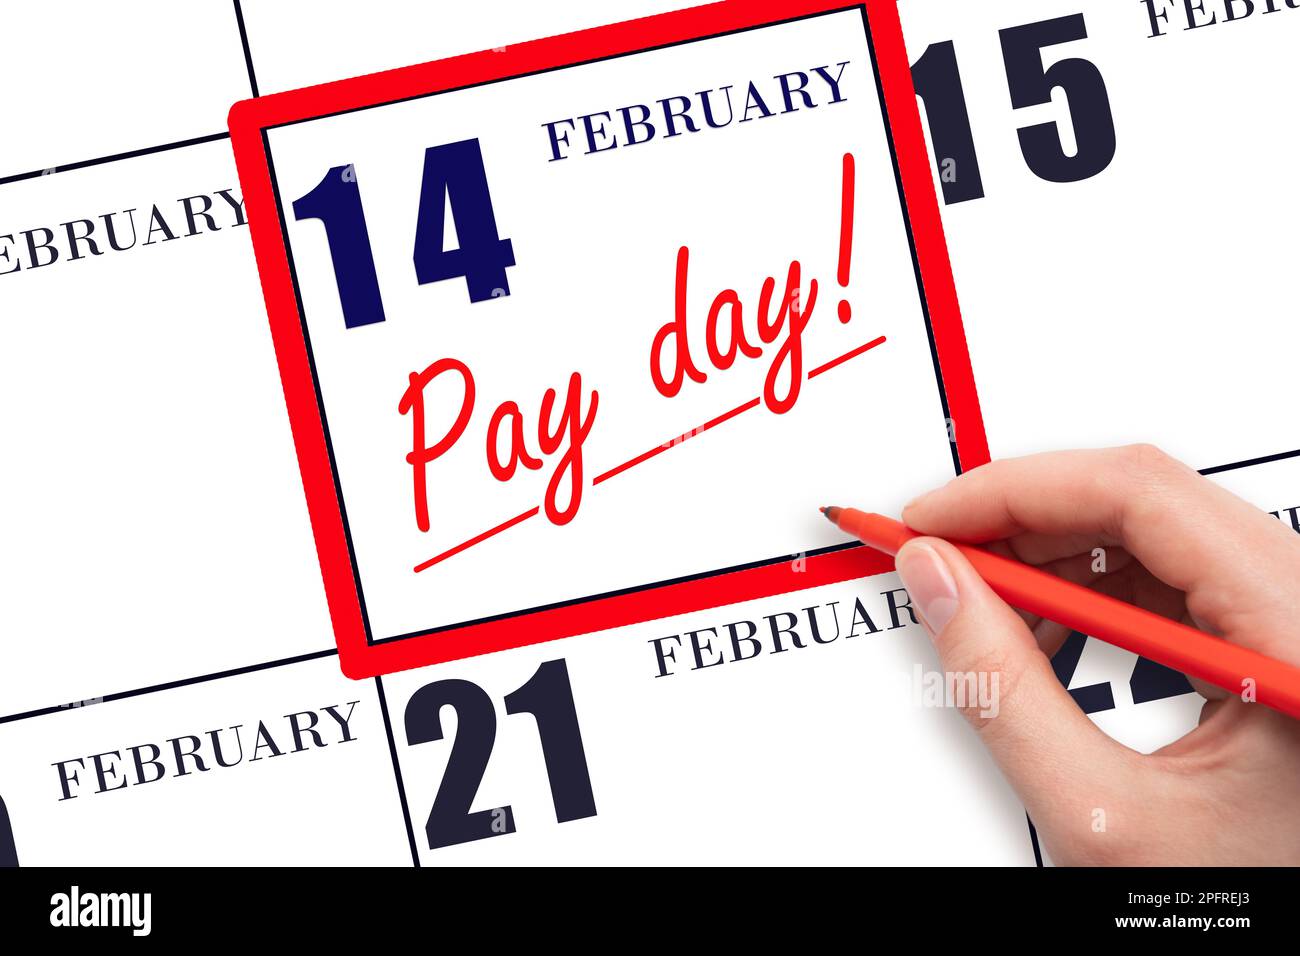 14th day of February. Hand writing text PAY DATE on calendar date February 14 and underline it. Payment due date.  Reminder concept of payment. Winter Stock Photo